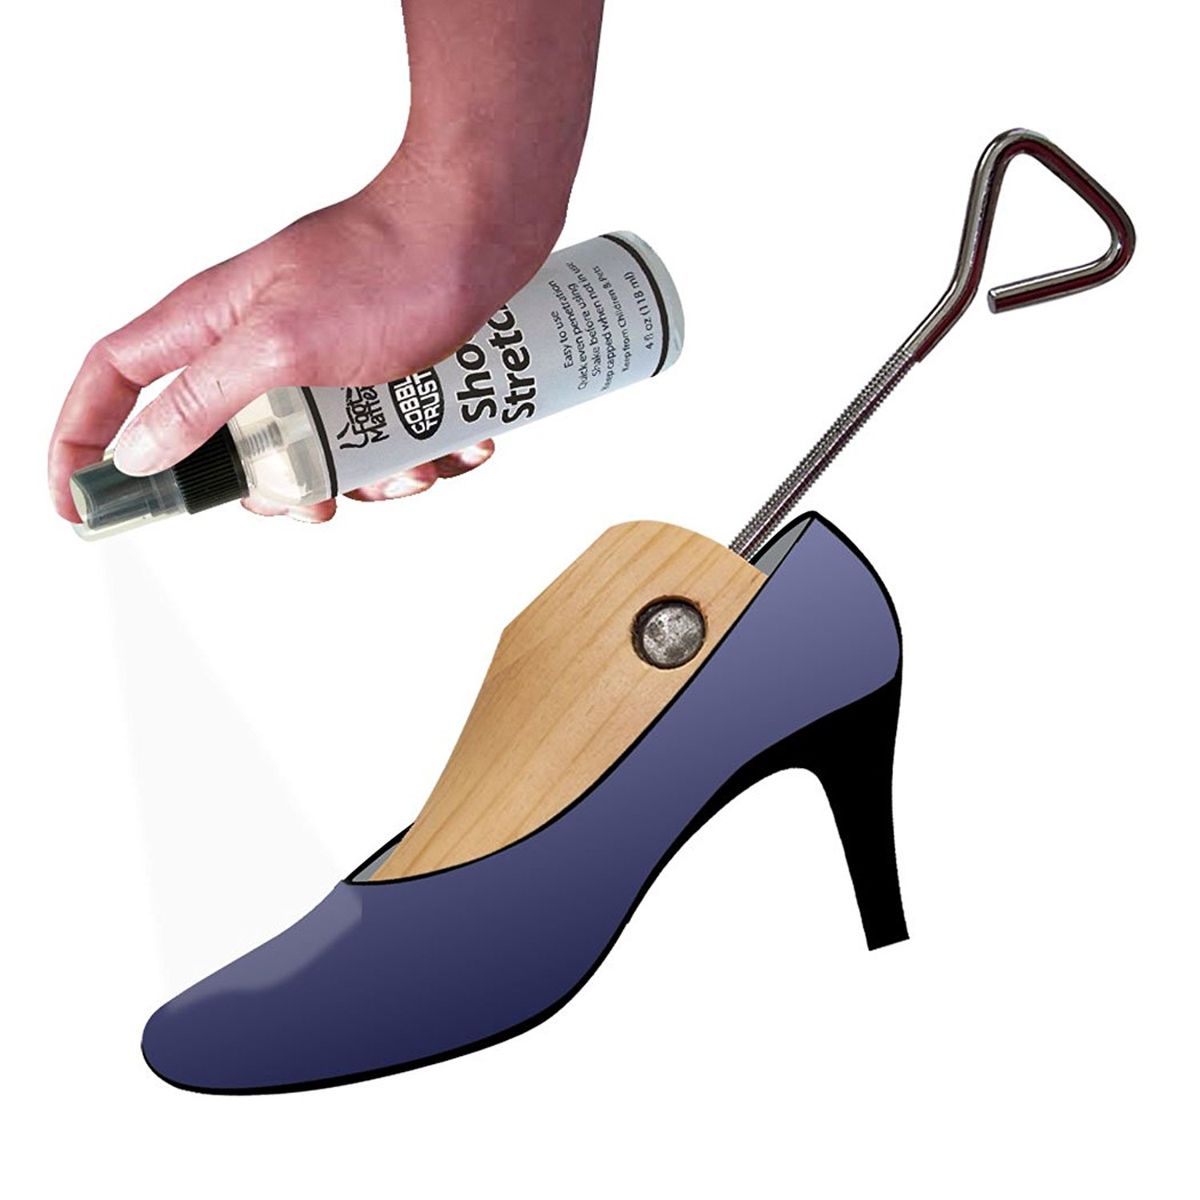 what is shoe stretch spray made of